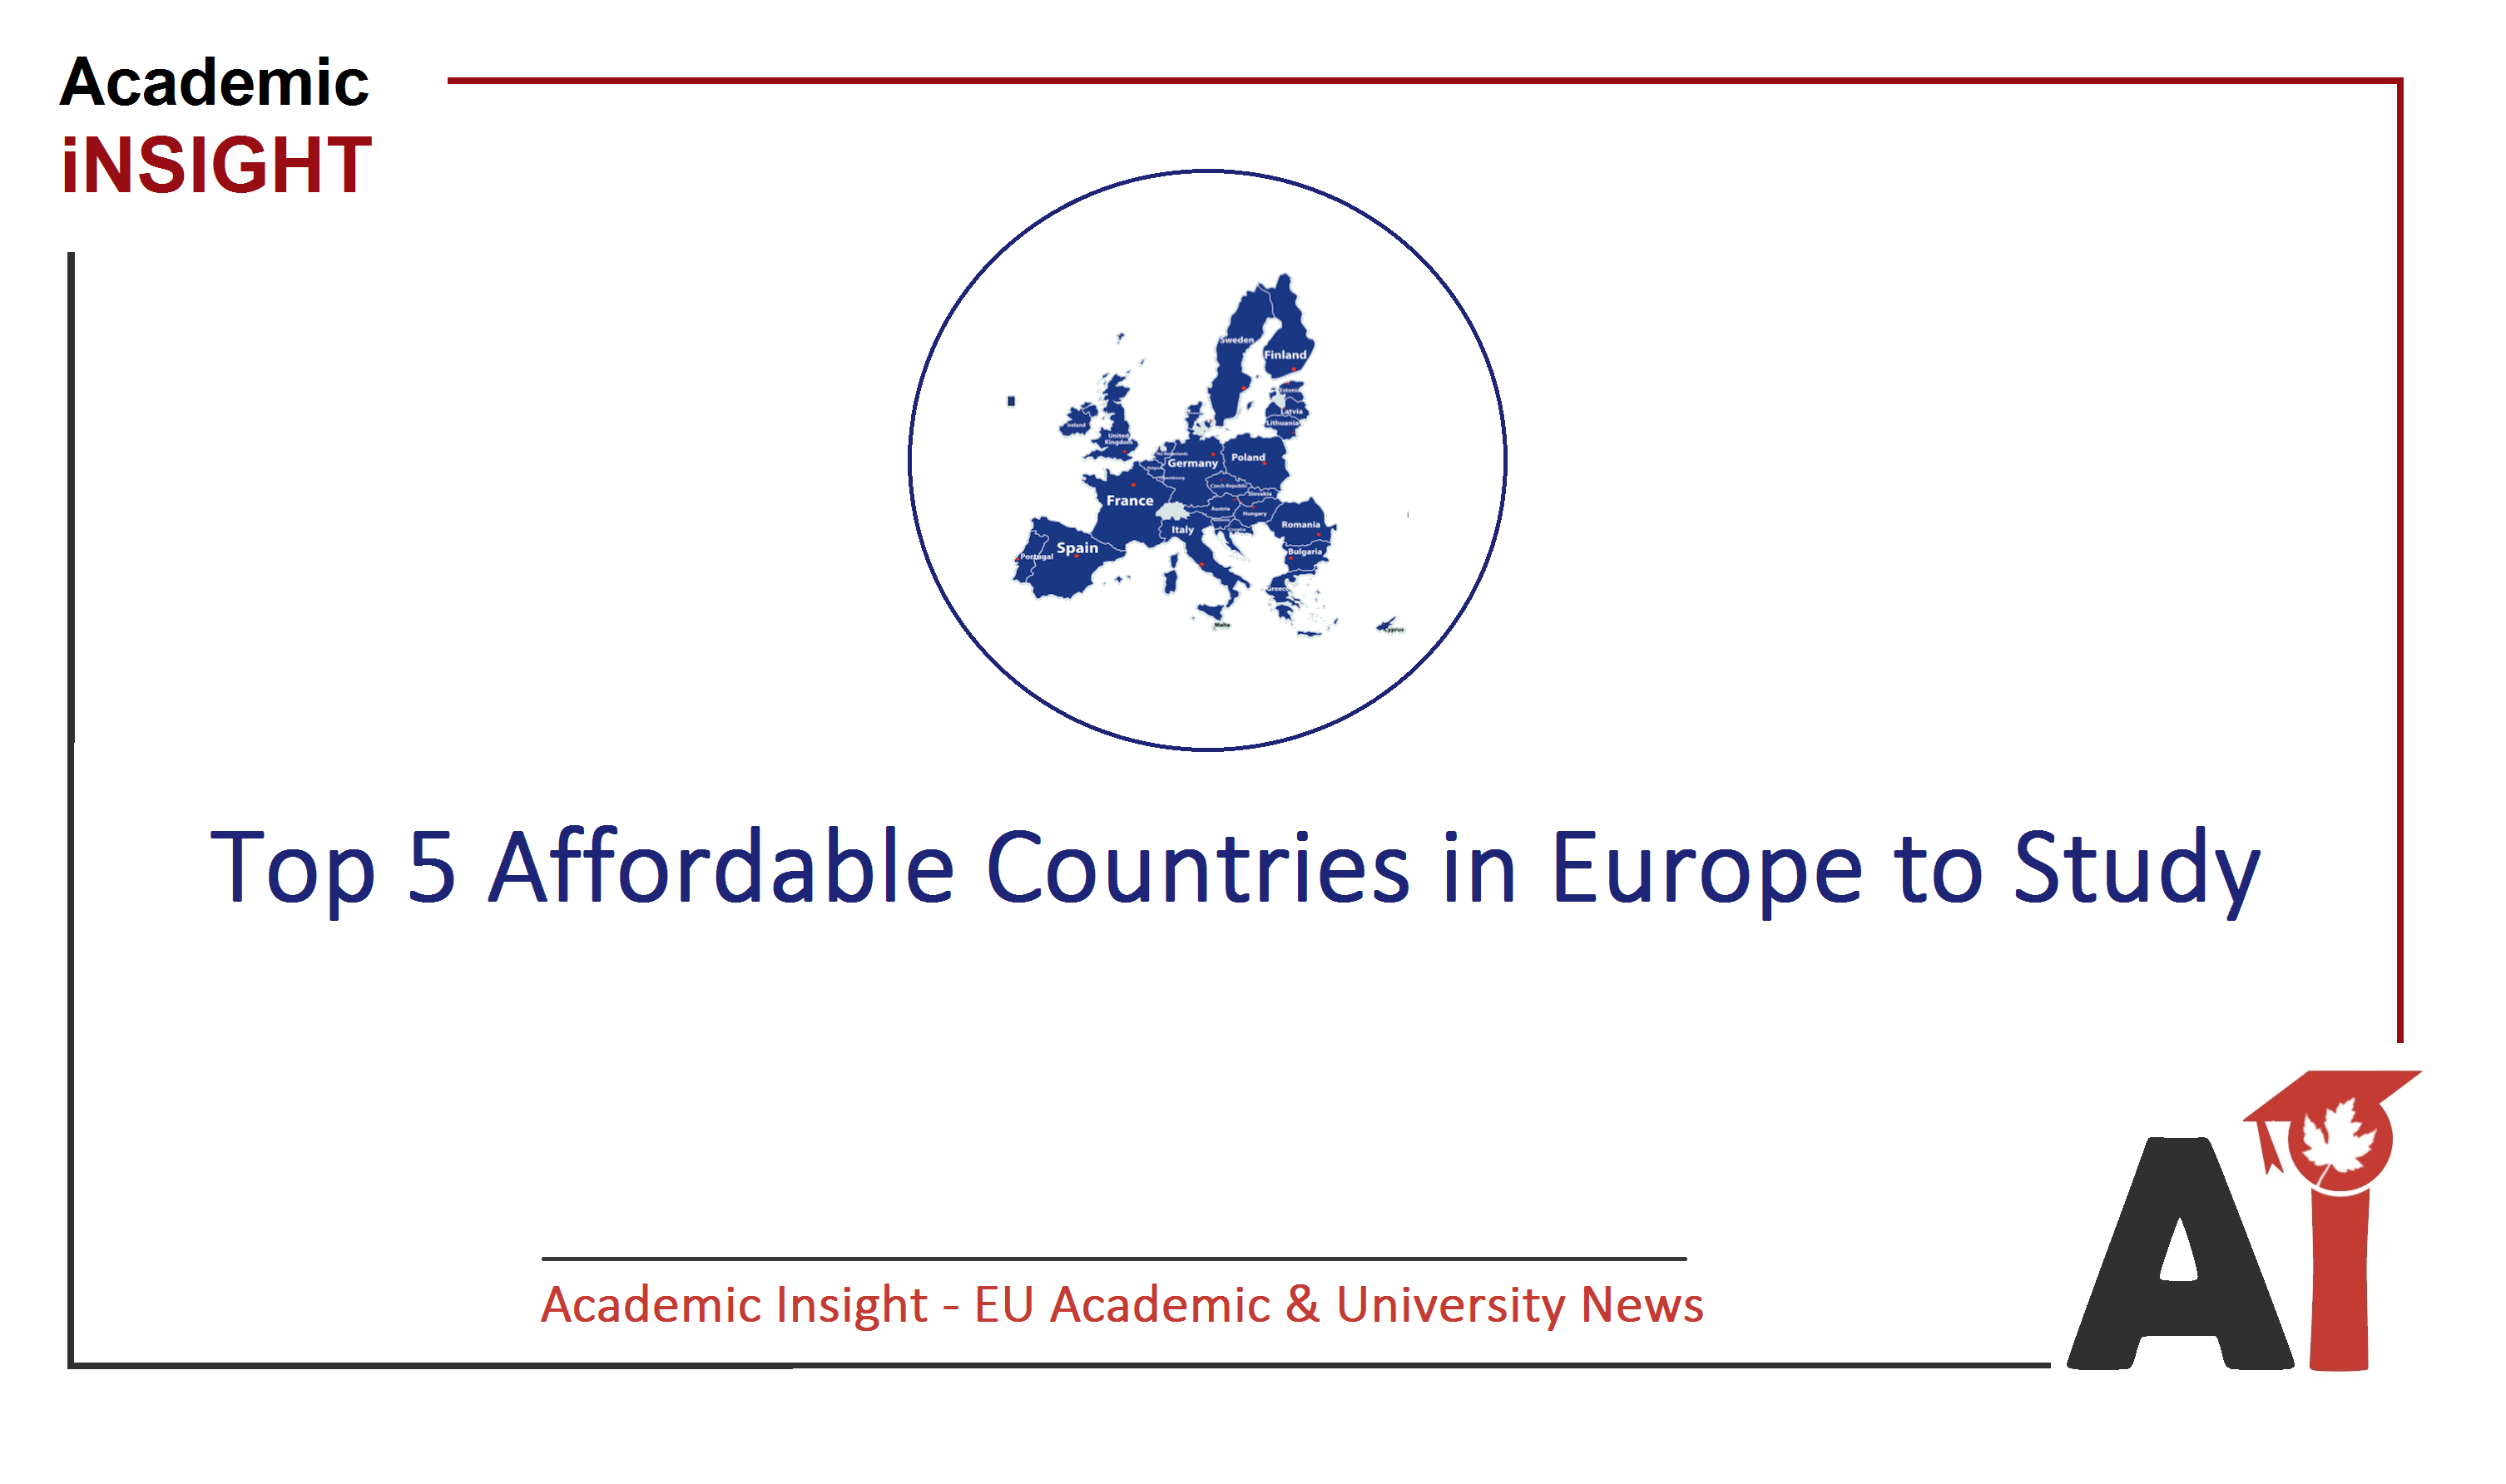 Top 5 Affordable Countries to Study in Europe